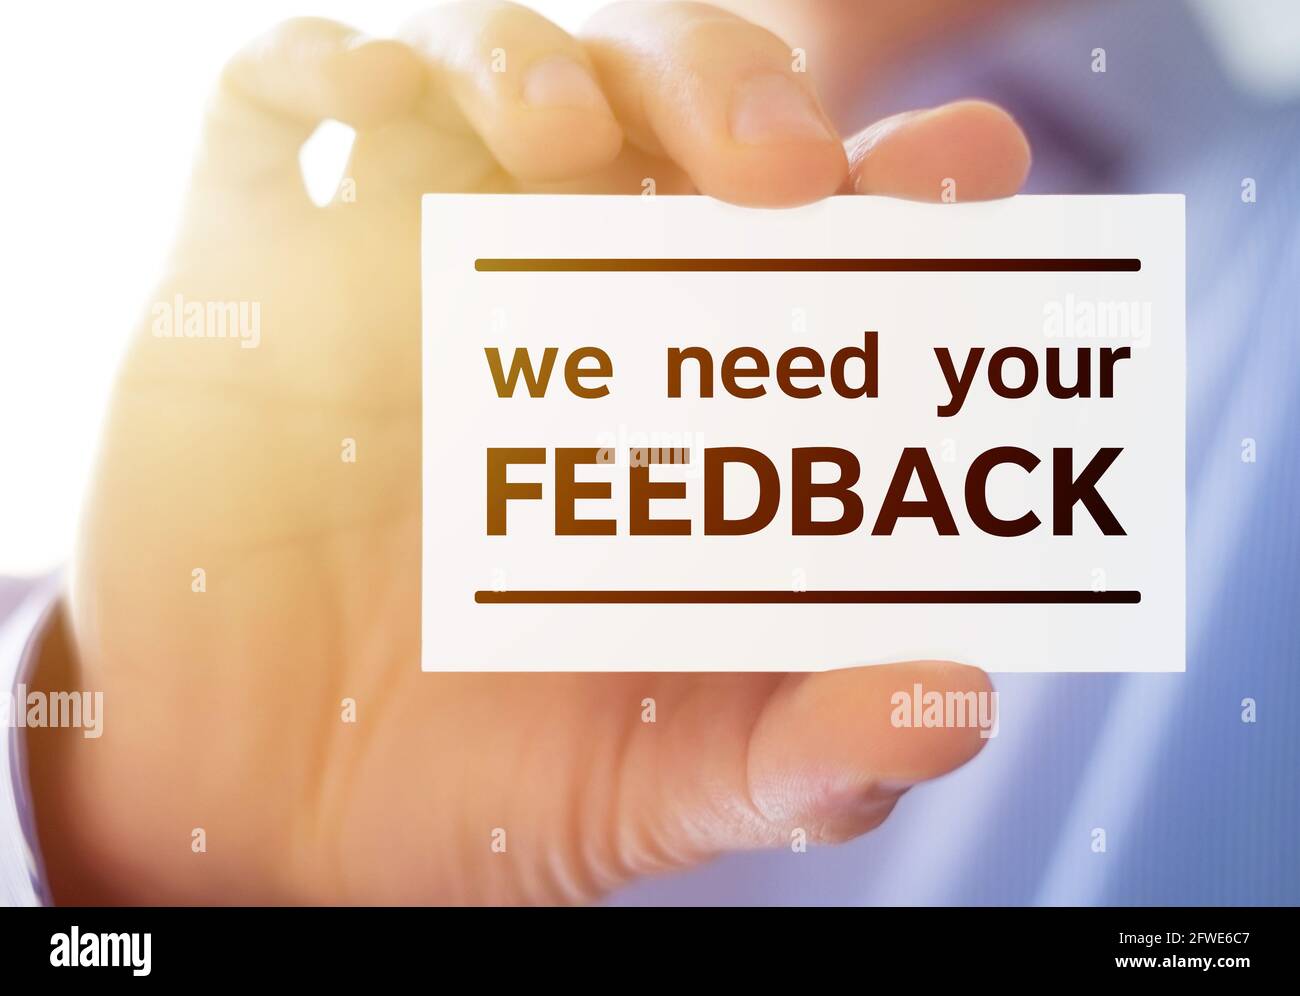 Business card message - we need your feedback Stock Photo